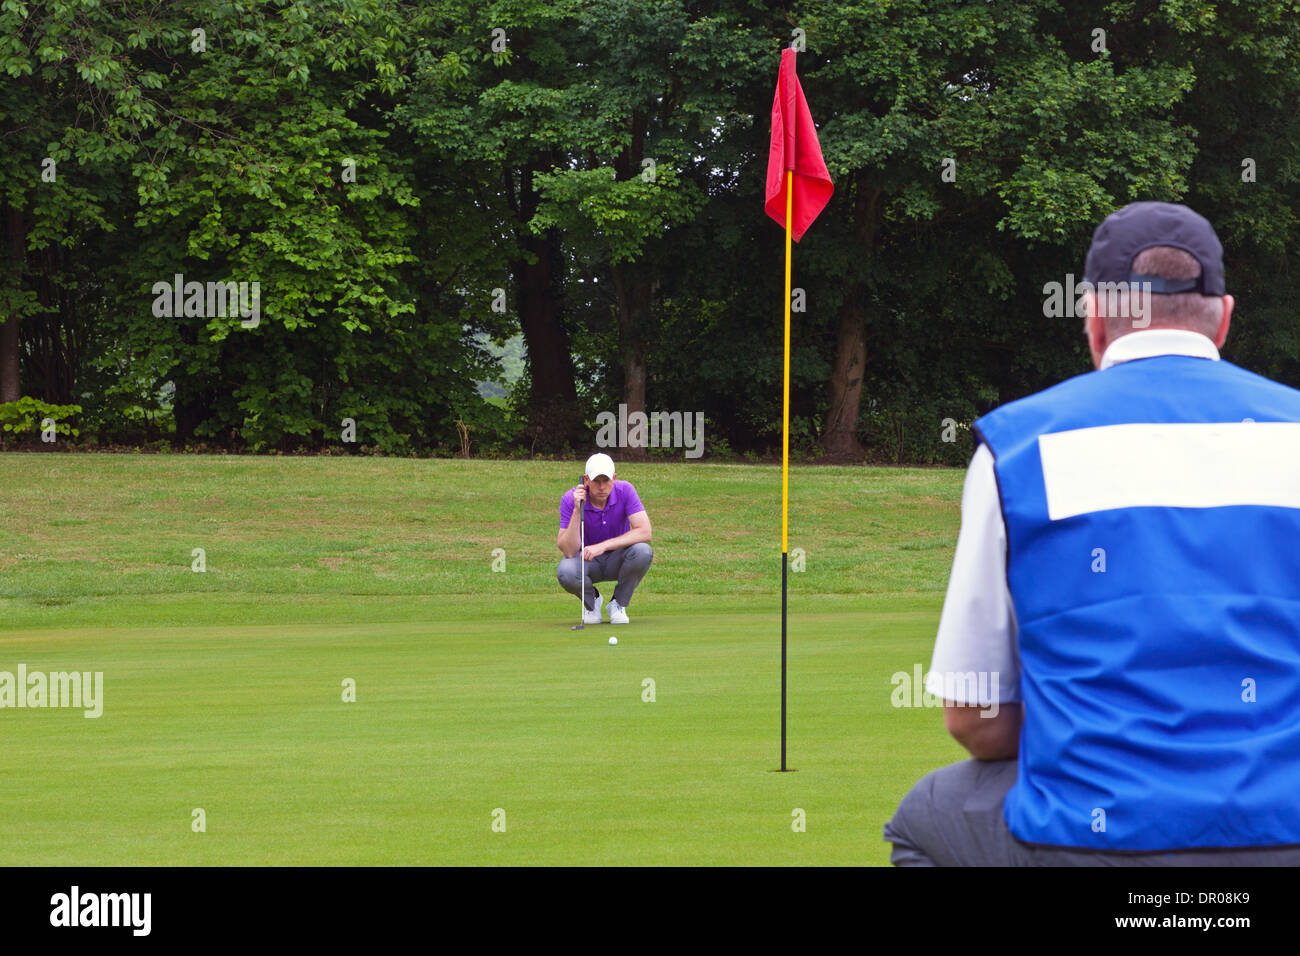 A professional golfer and his caddy reading the green to judge the line of the putt. Series of three photos. Stock Photo